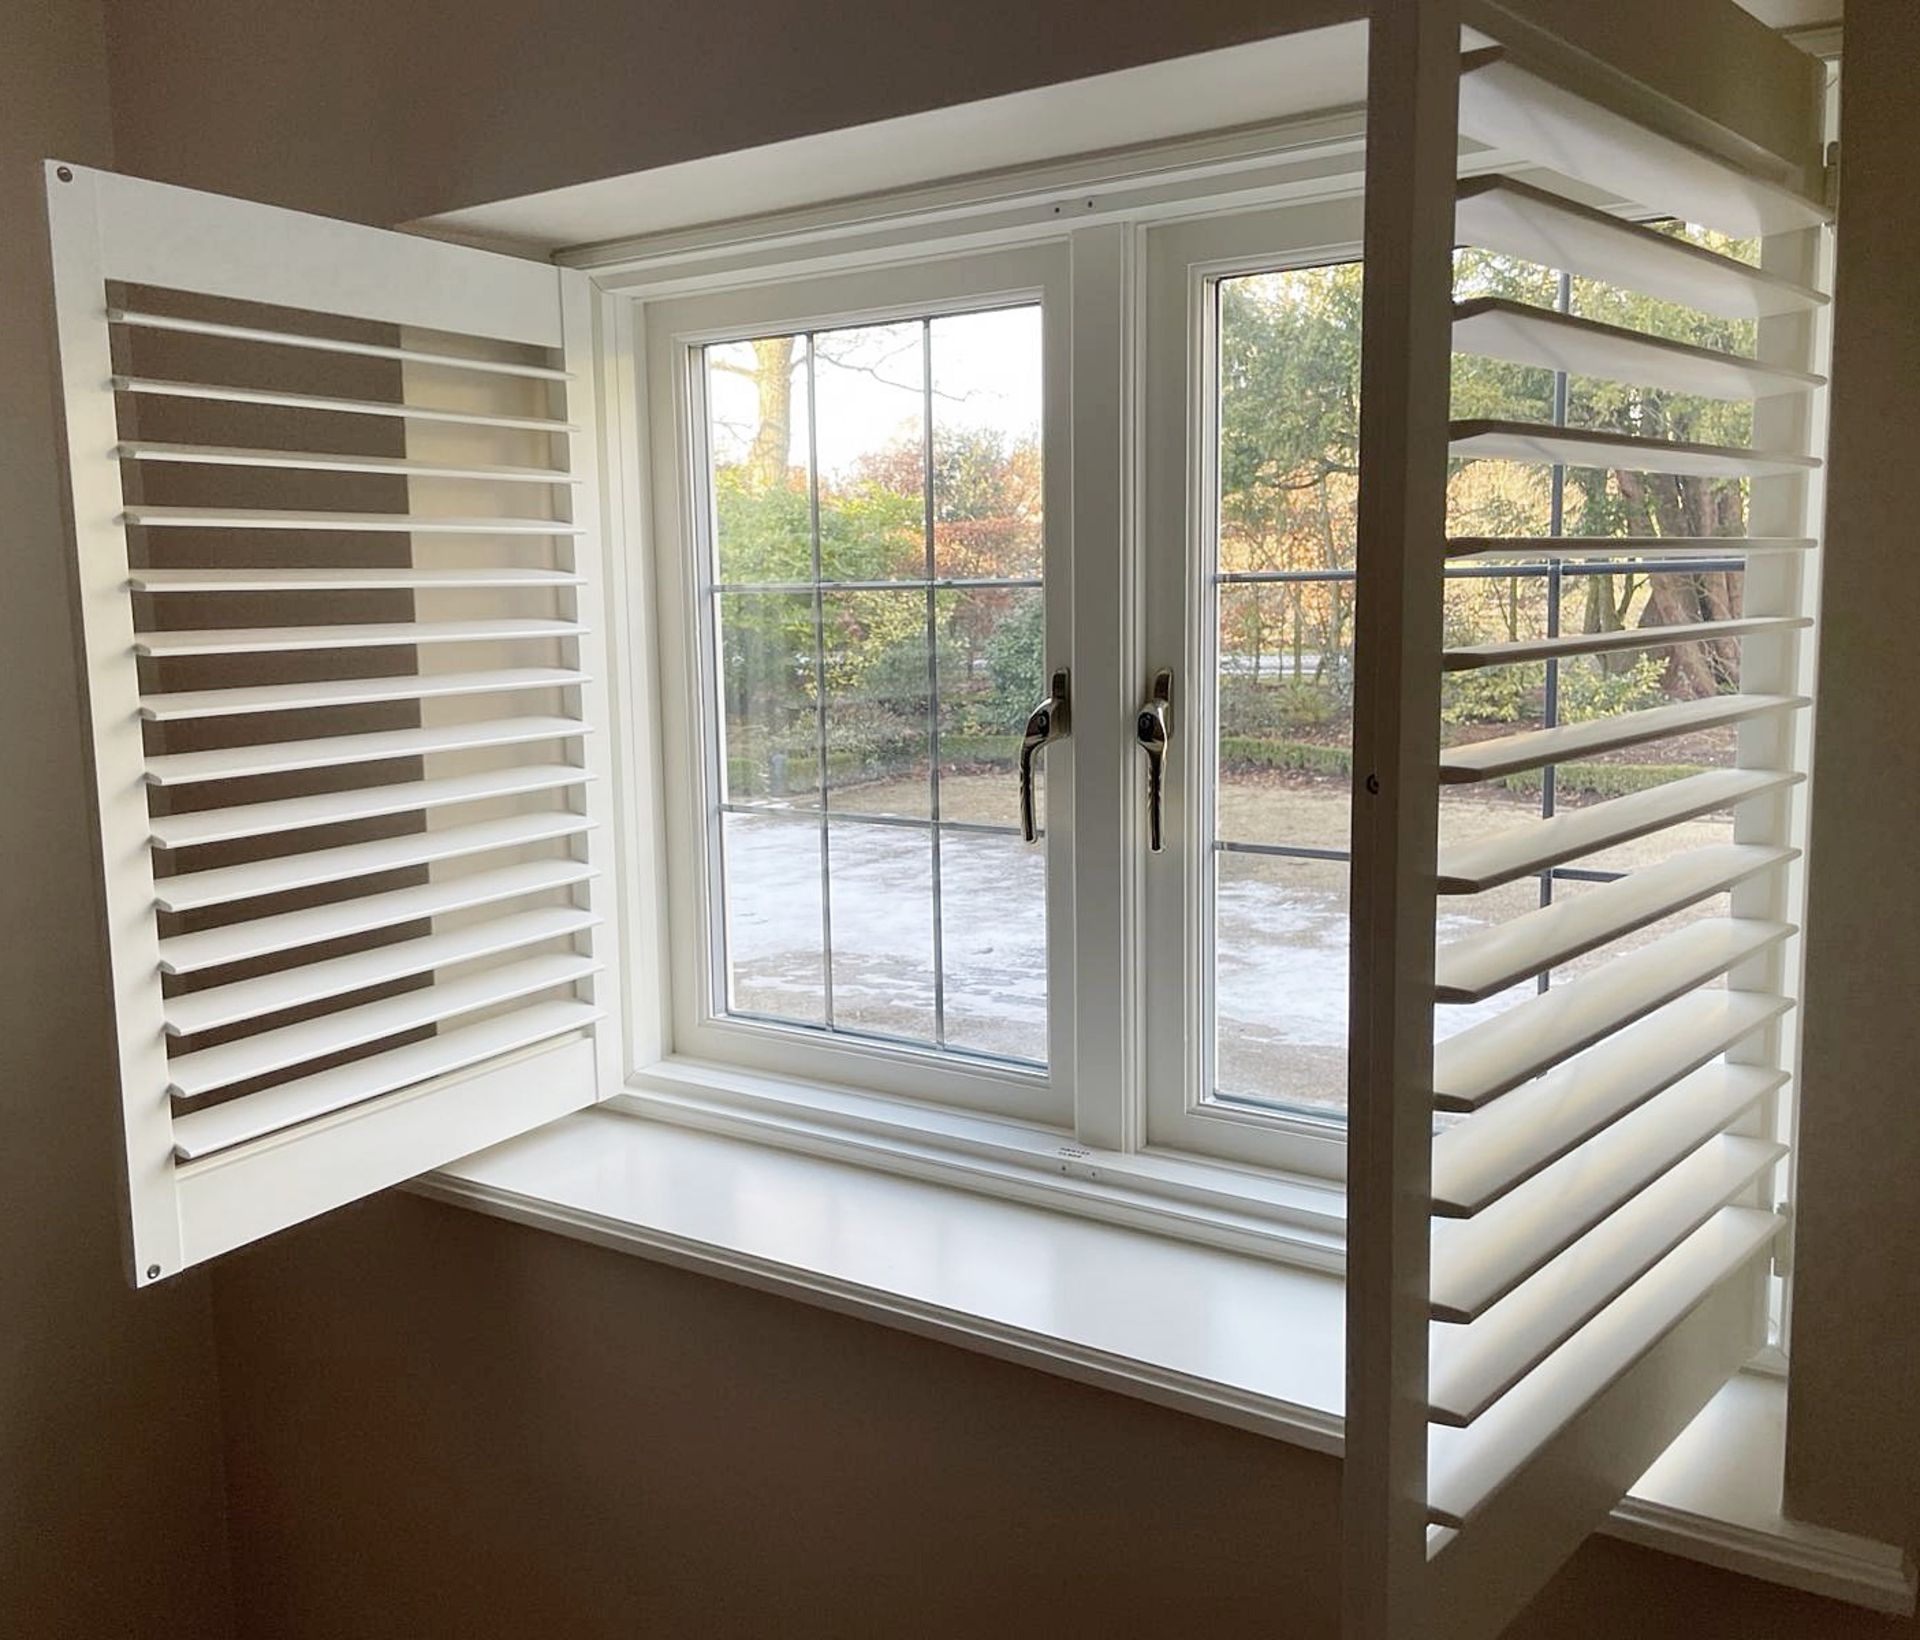 1 x Hardwood Timber Double Glazed Leaded 2-Pane Window Frame fitted with Shutter Blinds - Image 3 of 12